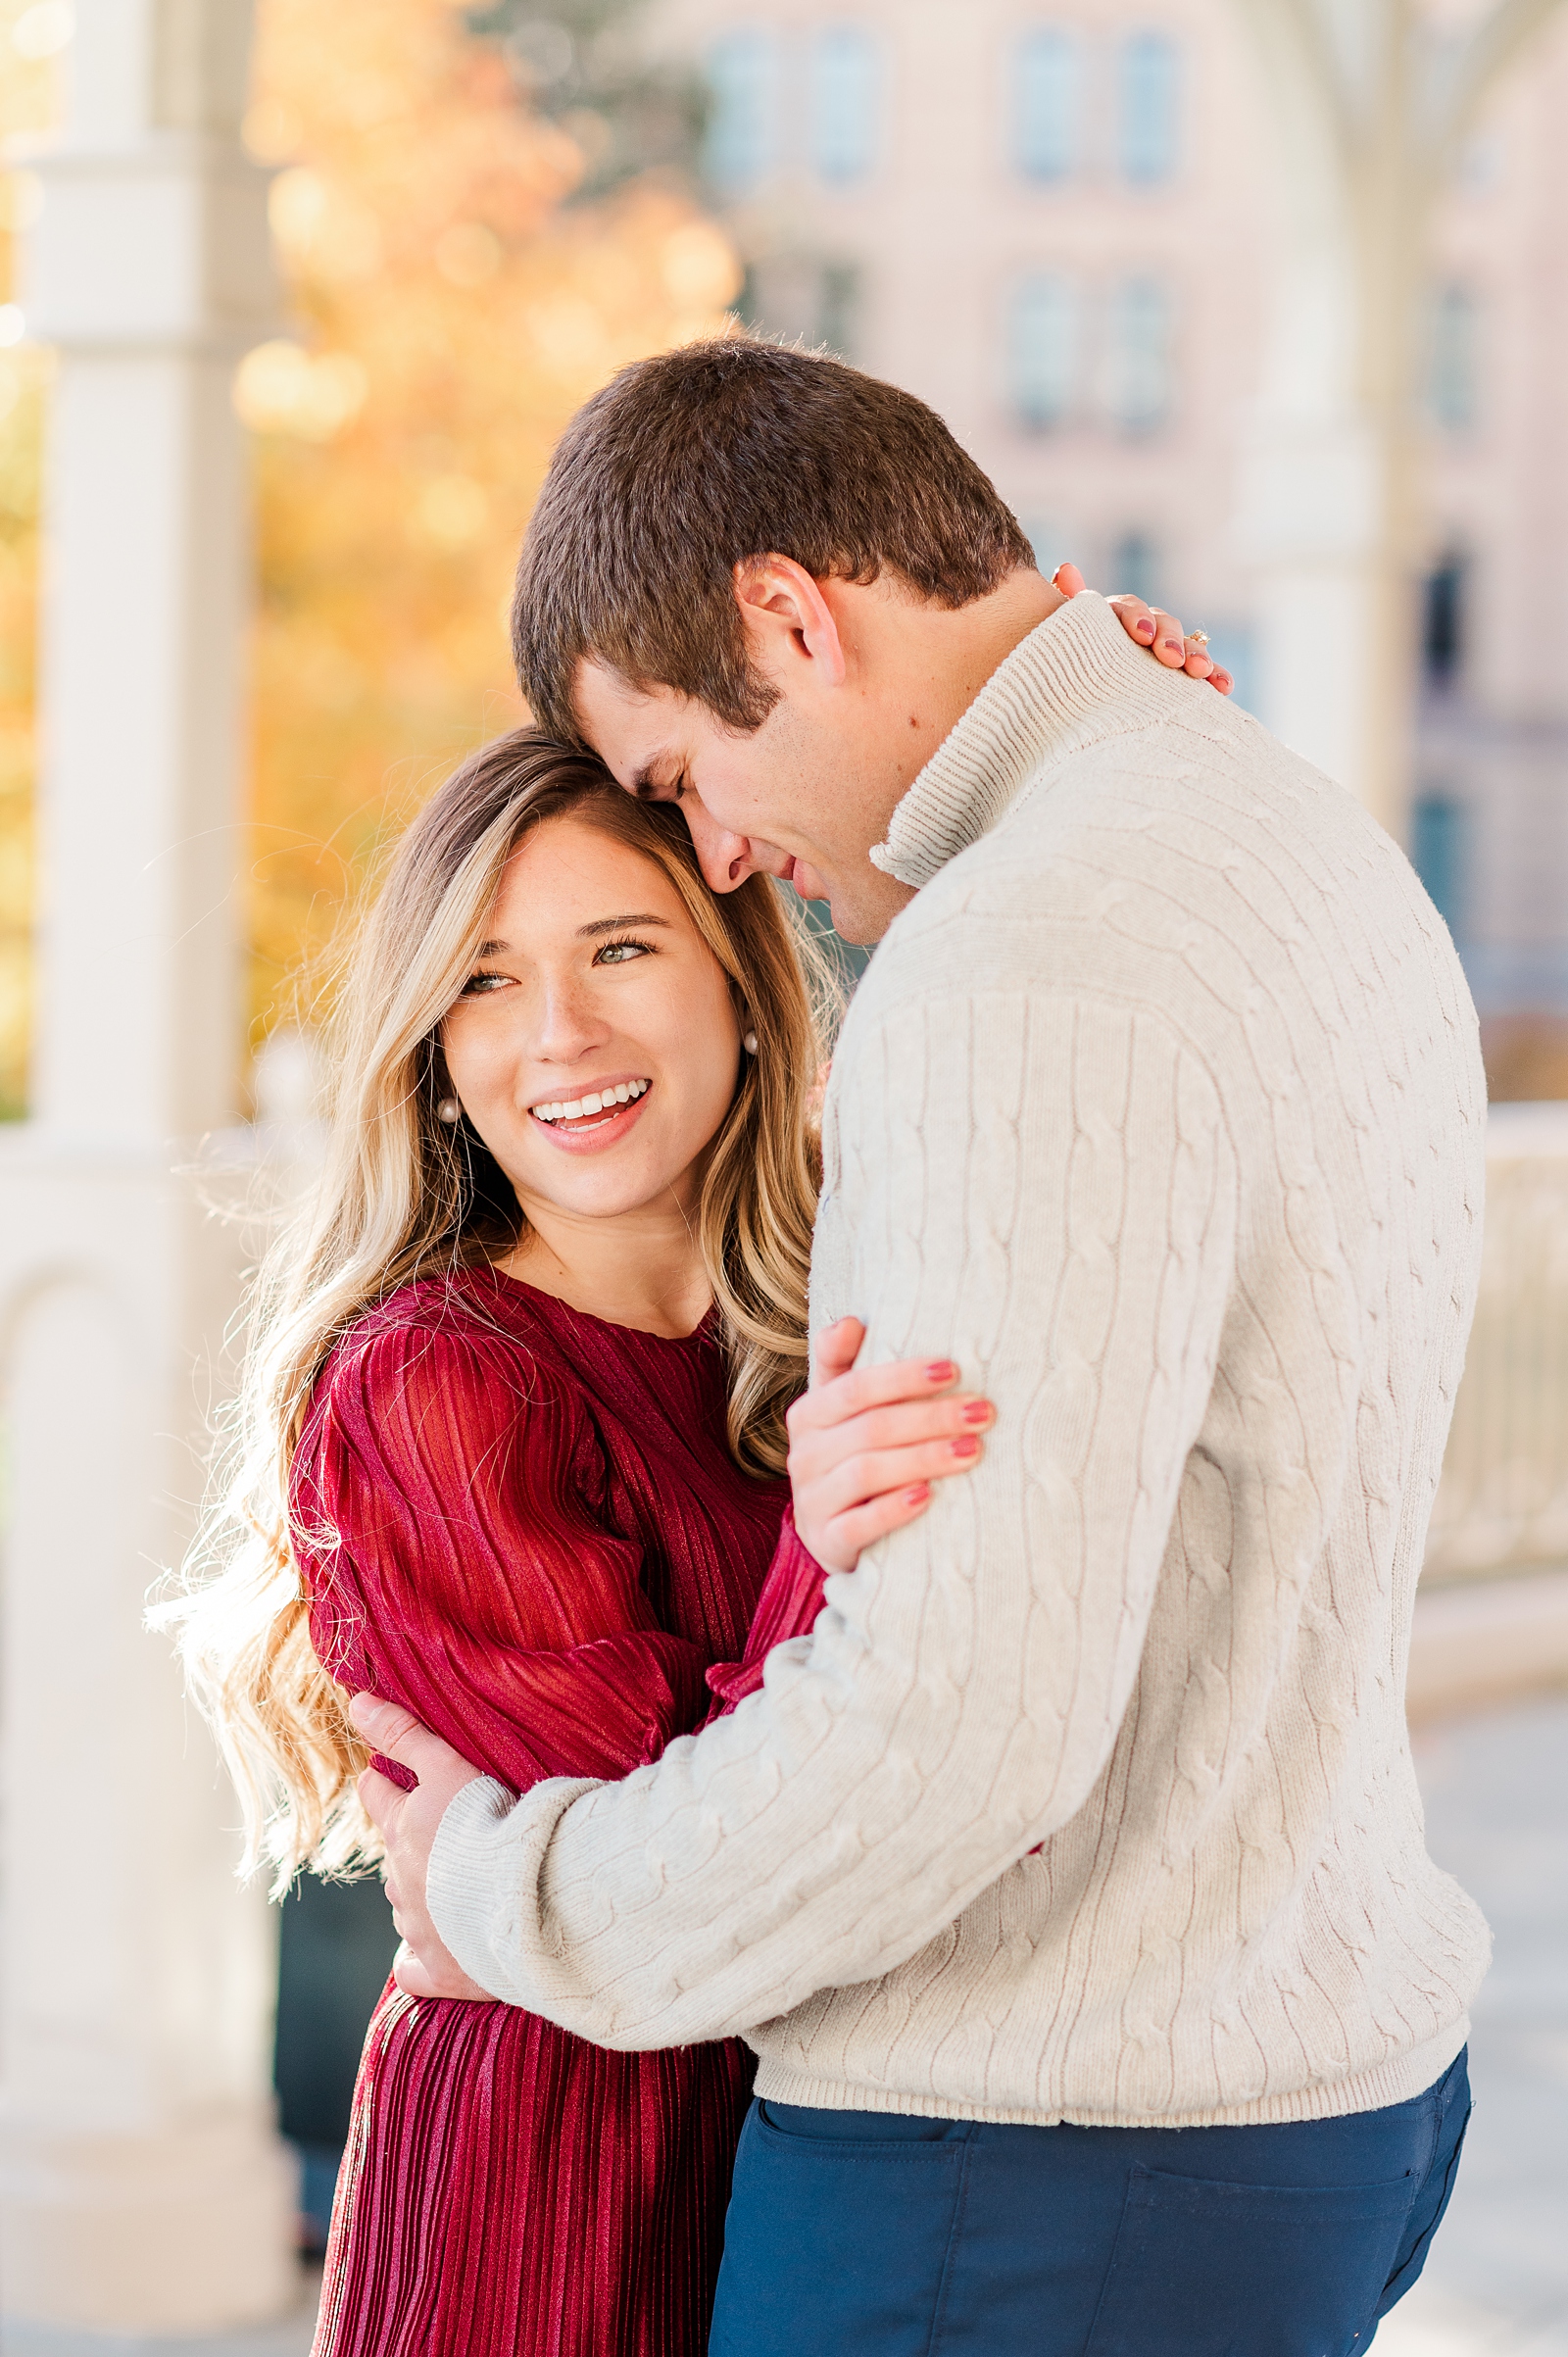 Engagement Session in downtown Roanoke by Virginia Wedding Photographer Kailey Brianne Photography 